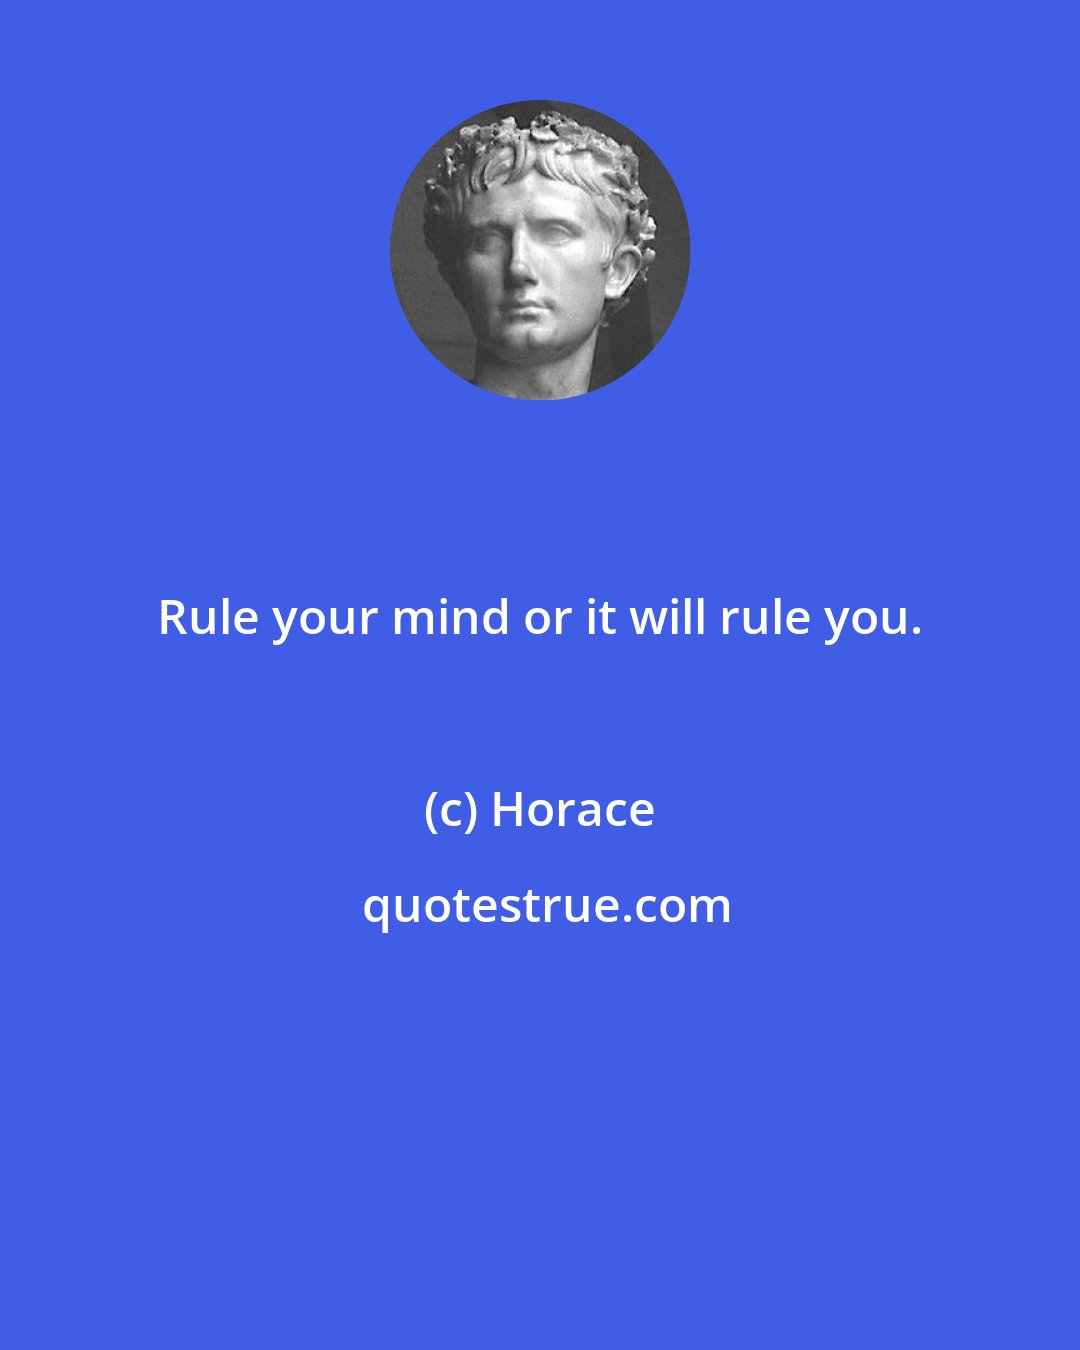 Horace: Rule your mind or it will rule you.